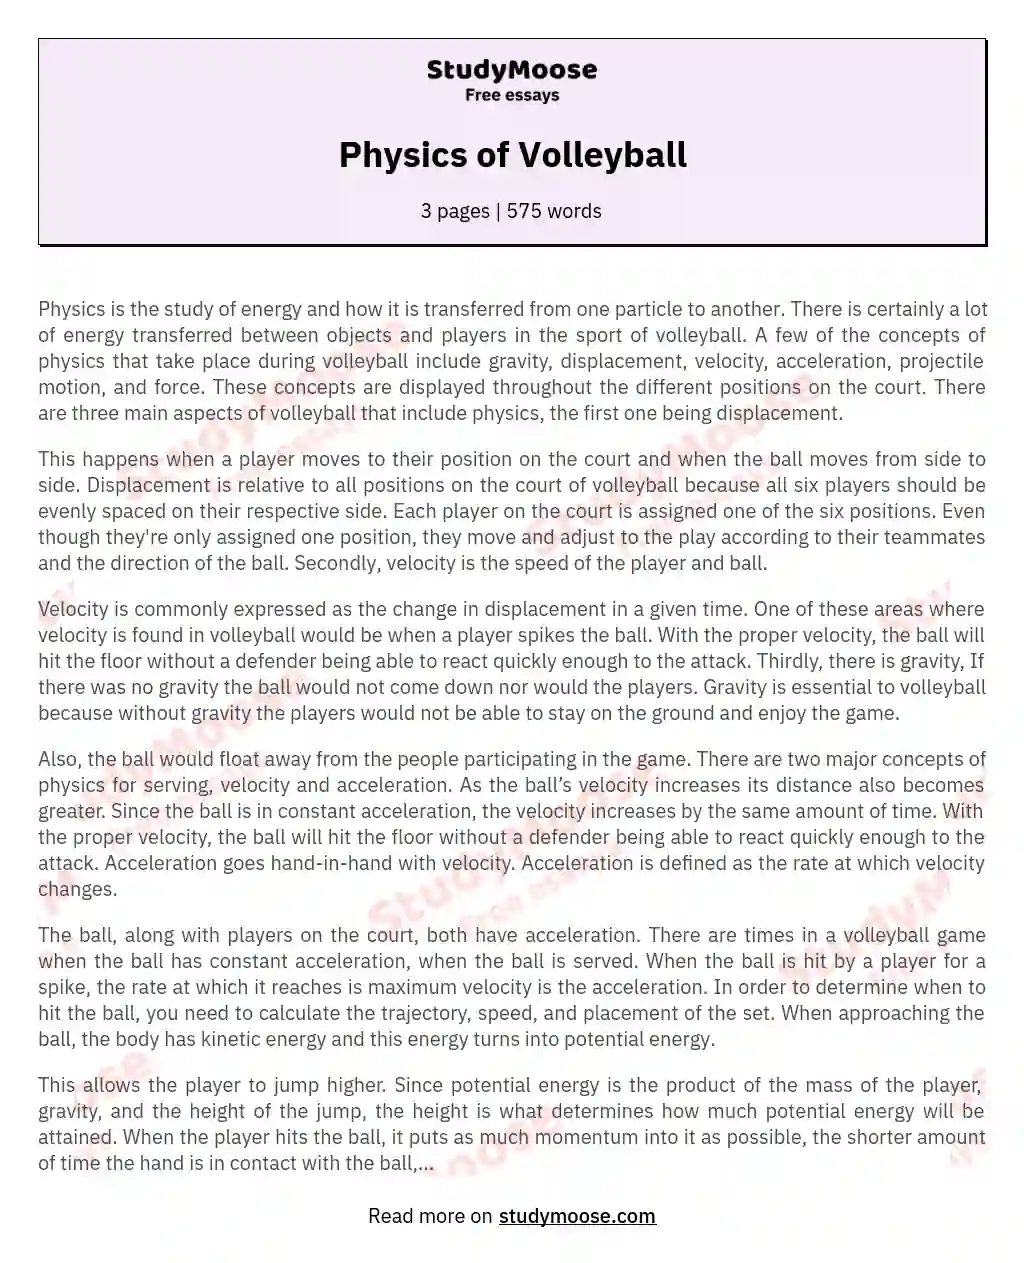 Physics of Volleyball